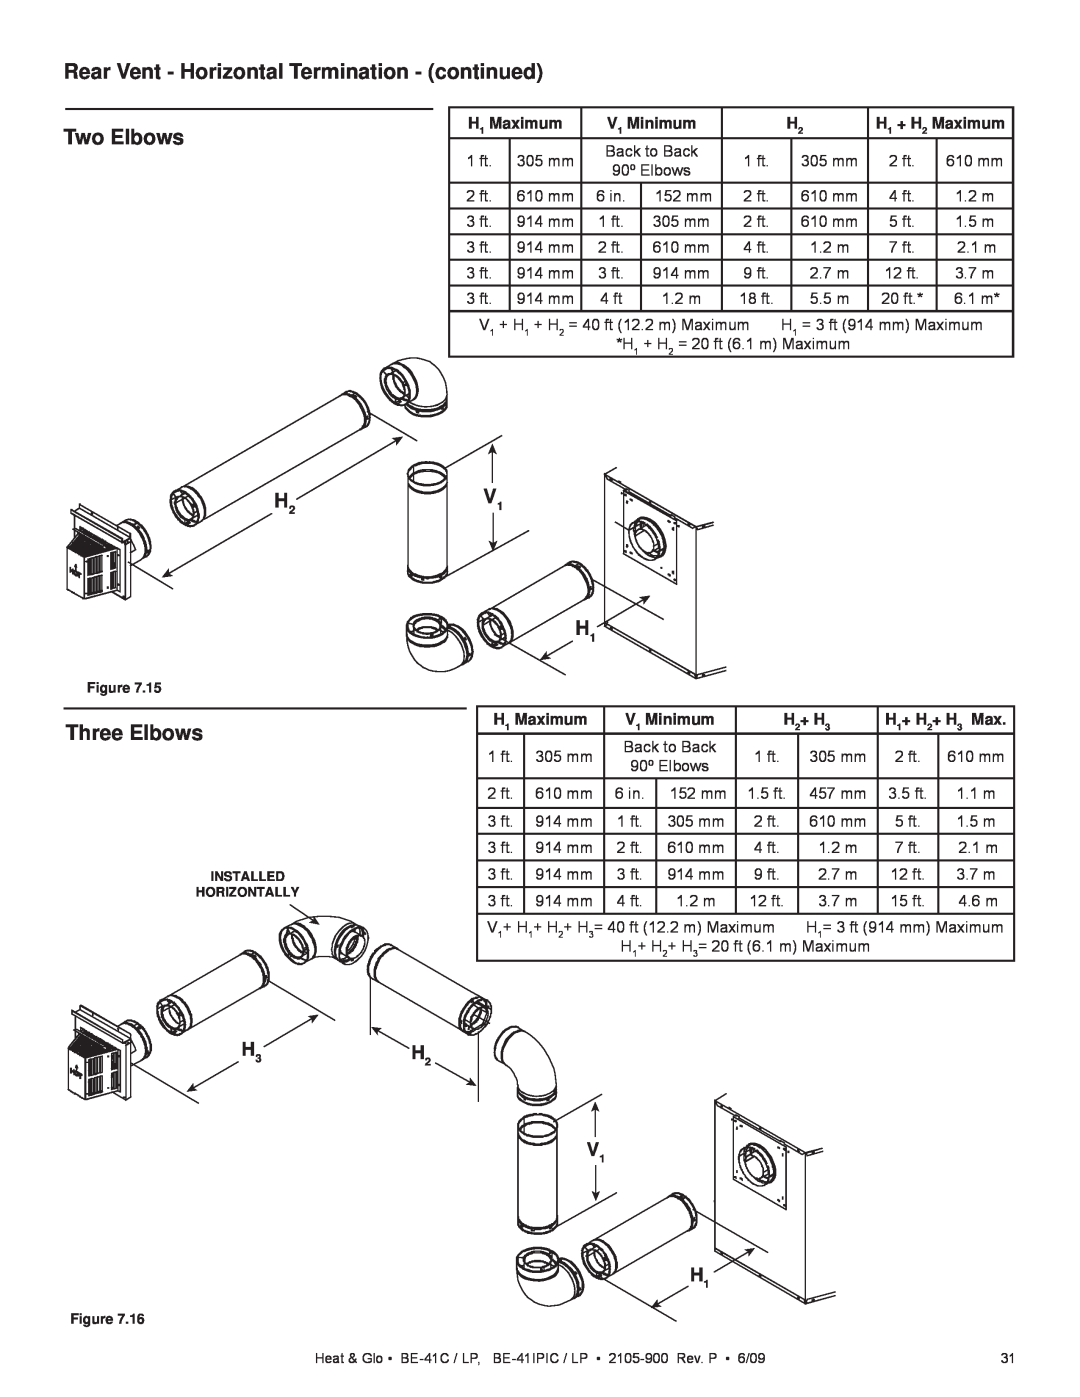 Heat & Glo LifeStyle BE-41IPILPC Rear Vent - Horizontal Termination - continued, Two Elbows, Three Elbows, V1 H1, H2+ H3 